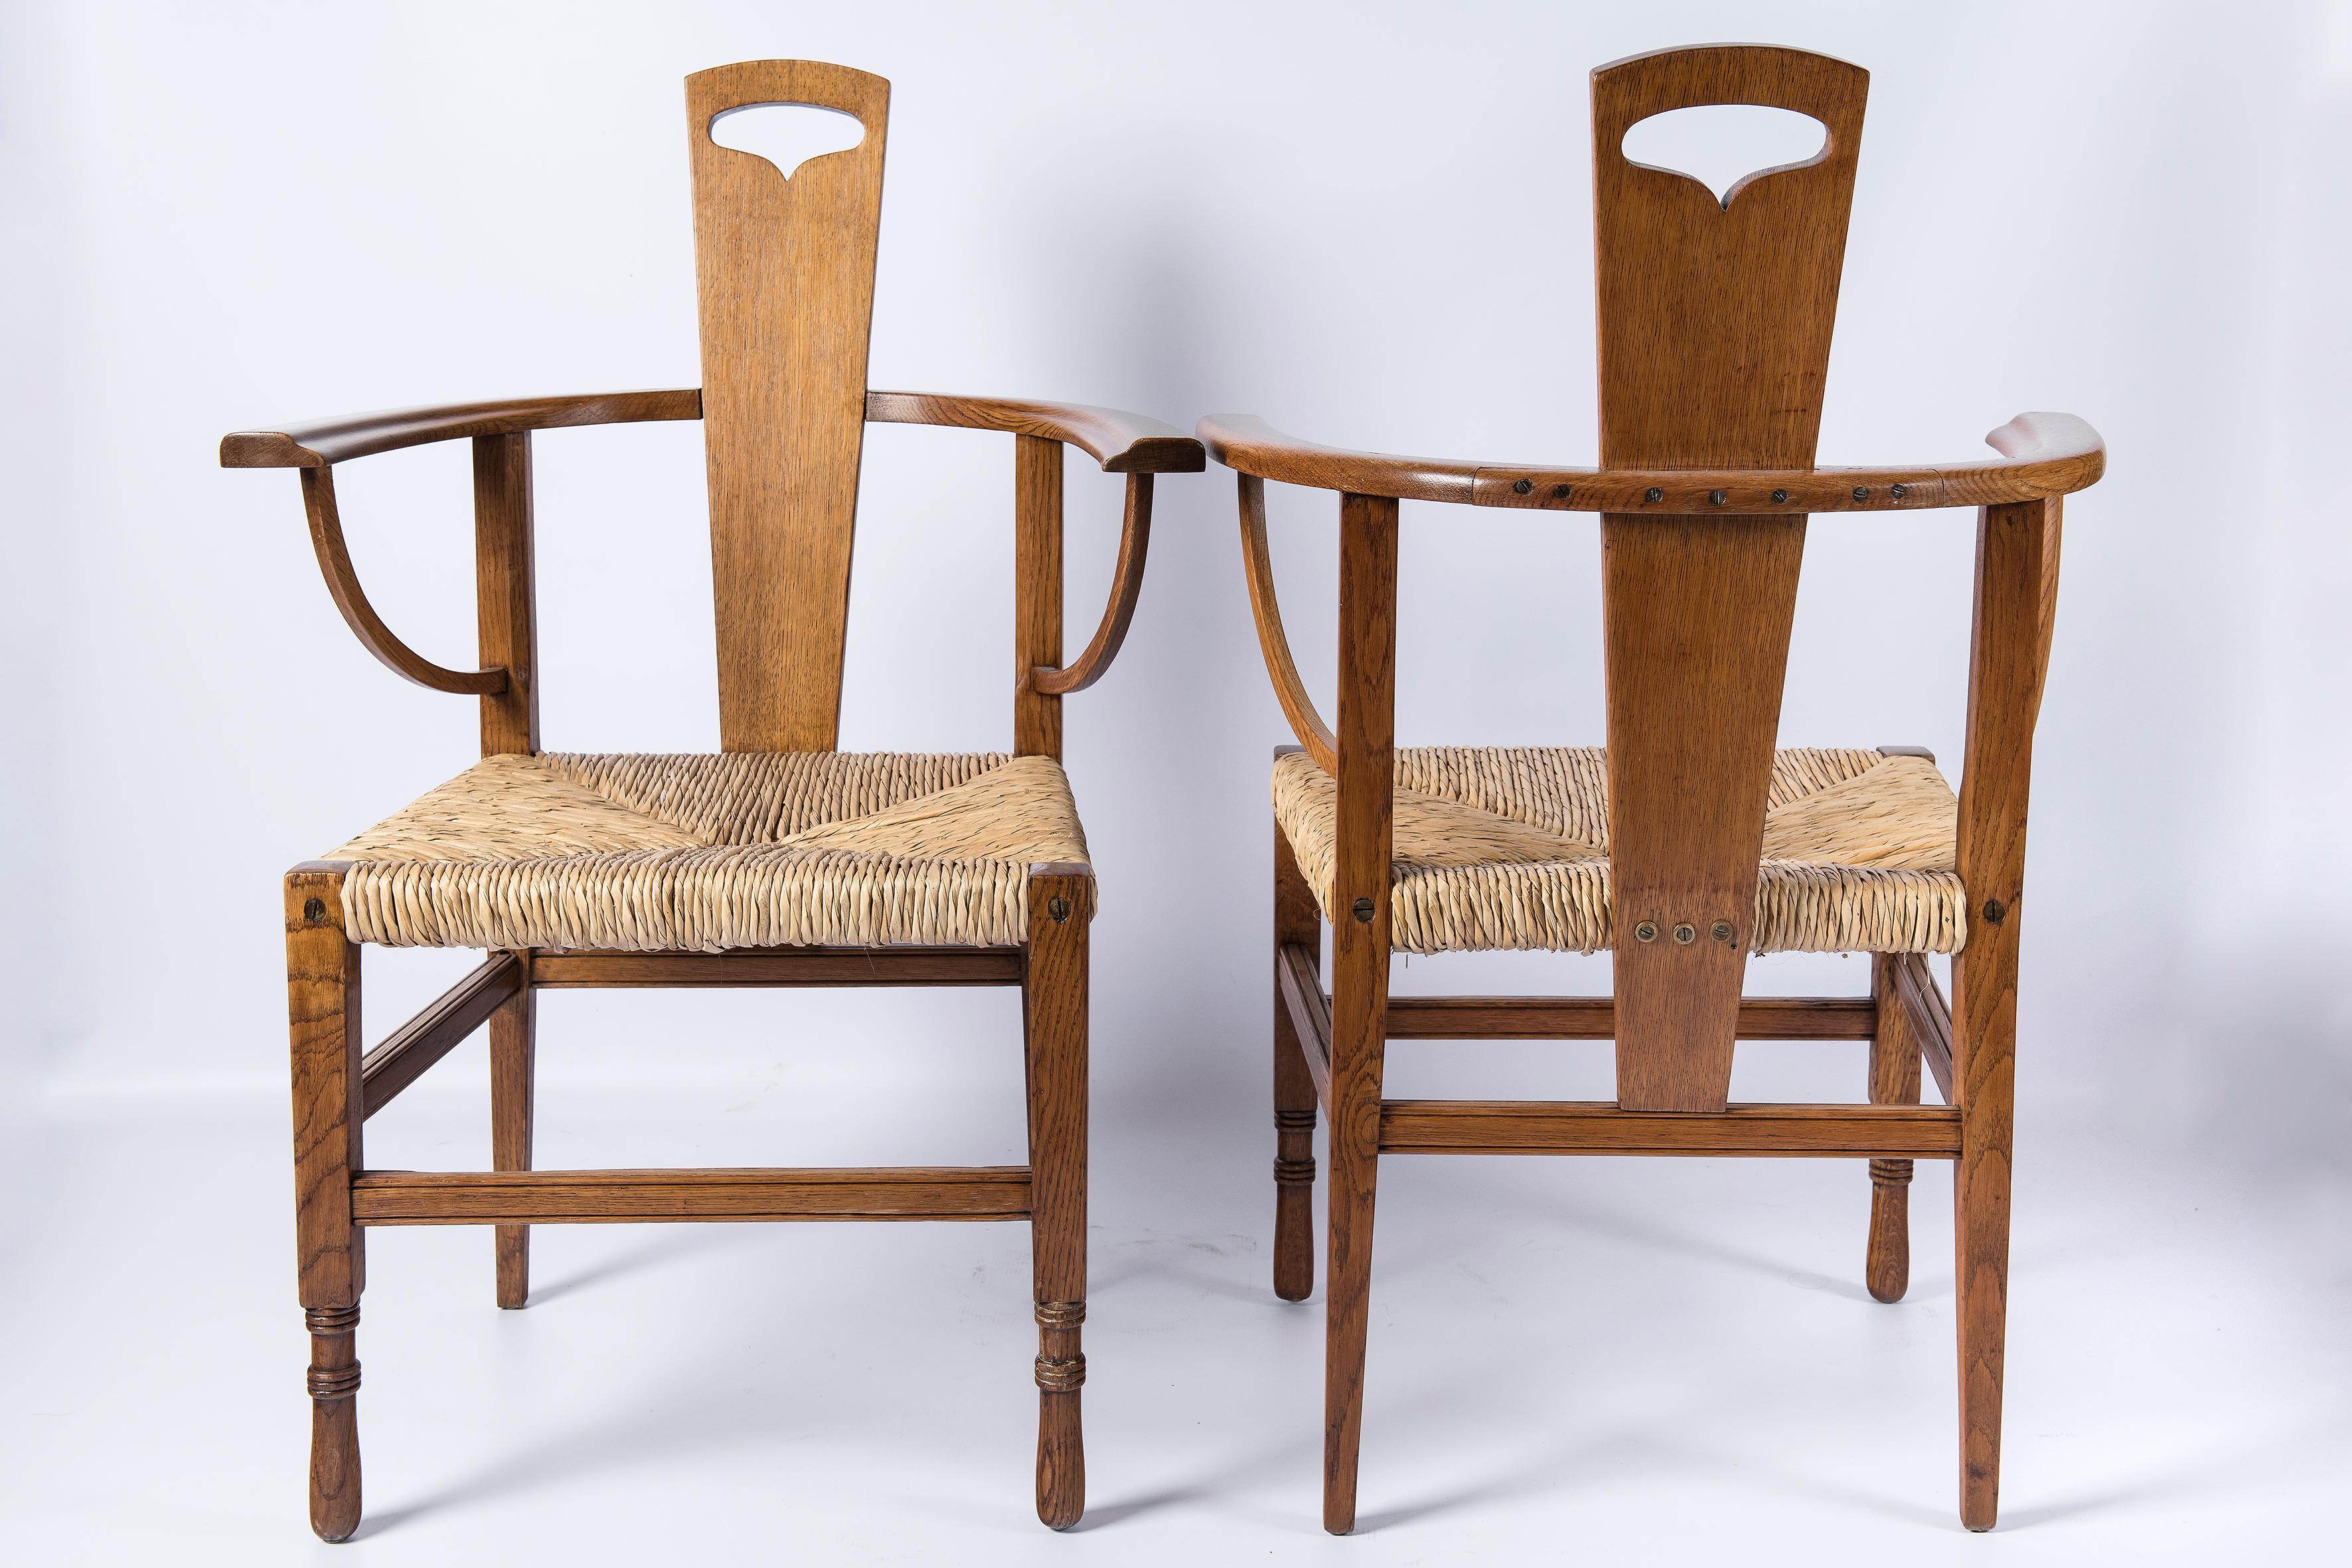 Pair of oak and rush armchairs. Attributed to George Henry Walton. Scotland, circa 1890. Glasgow school period.